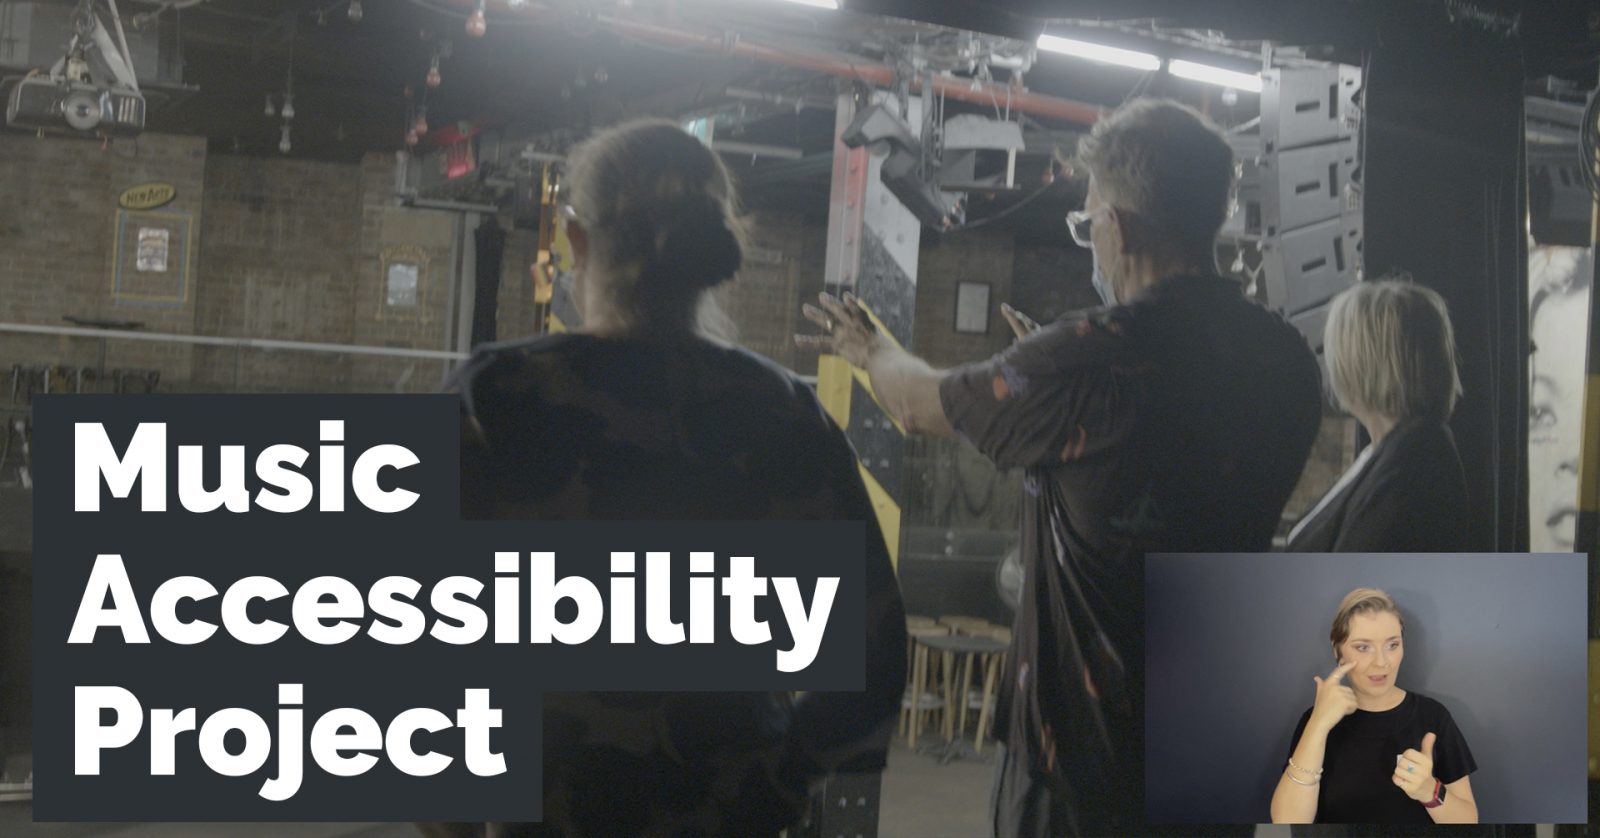 Shot from the stage of Oxford Art Factory, an Auslan interpreter and project title 'Music Accessibility Project."